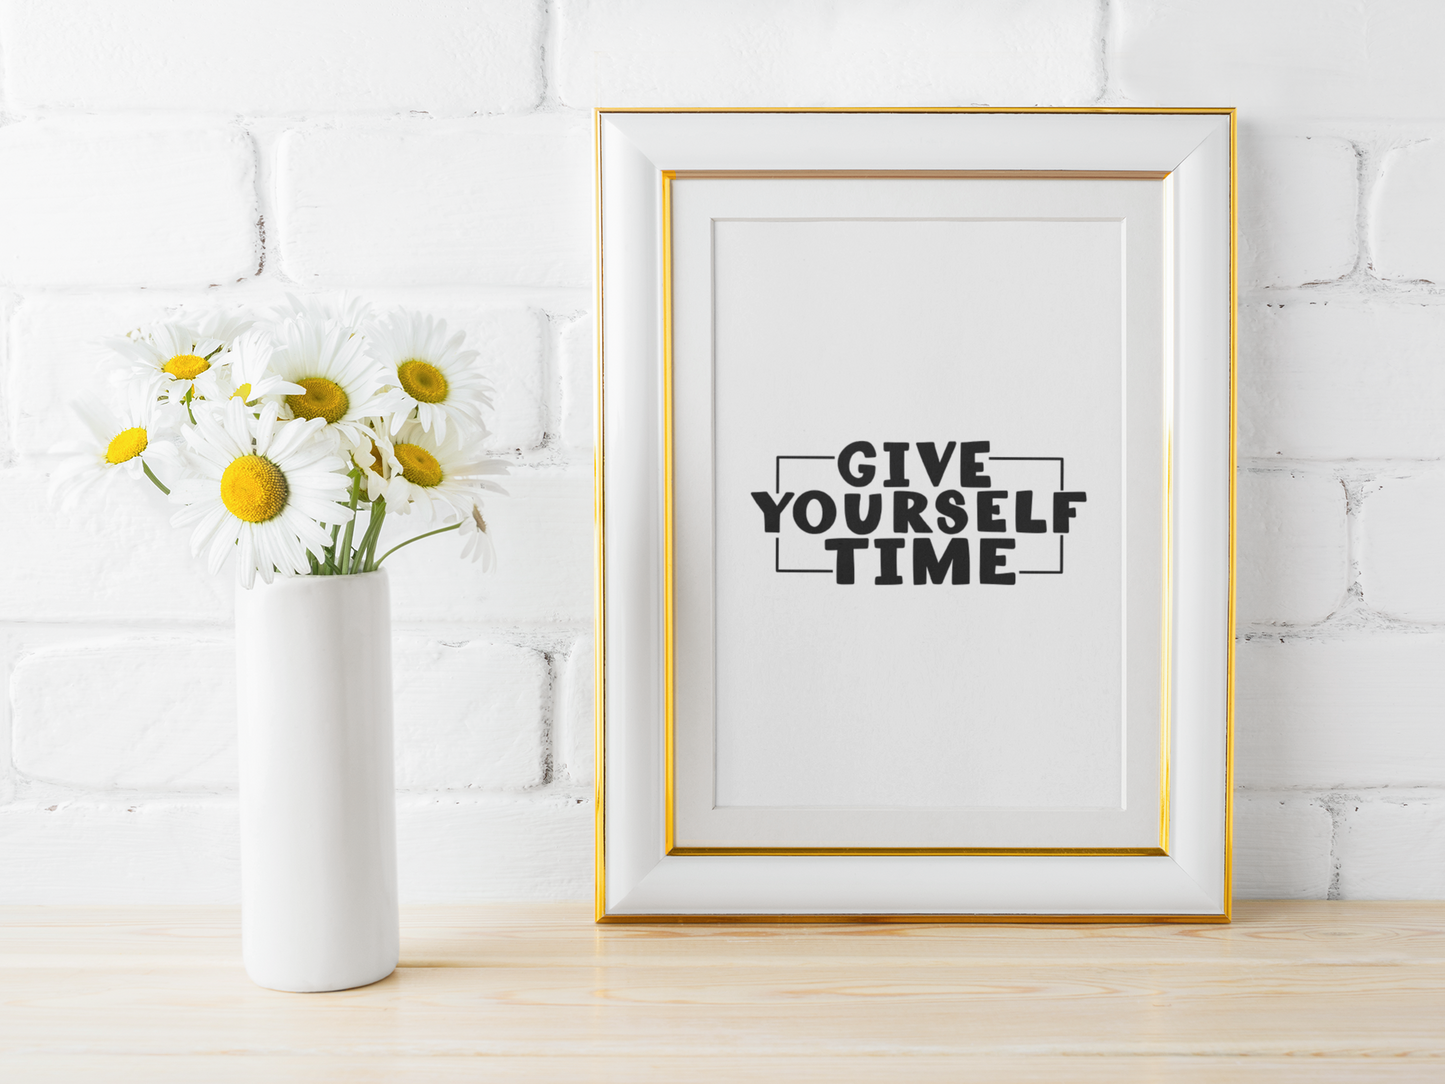 Give Yourself Time Mental Health Inspirational Wall Decor Quote Print